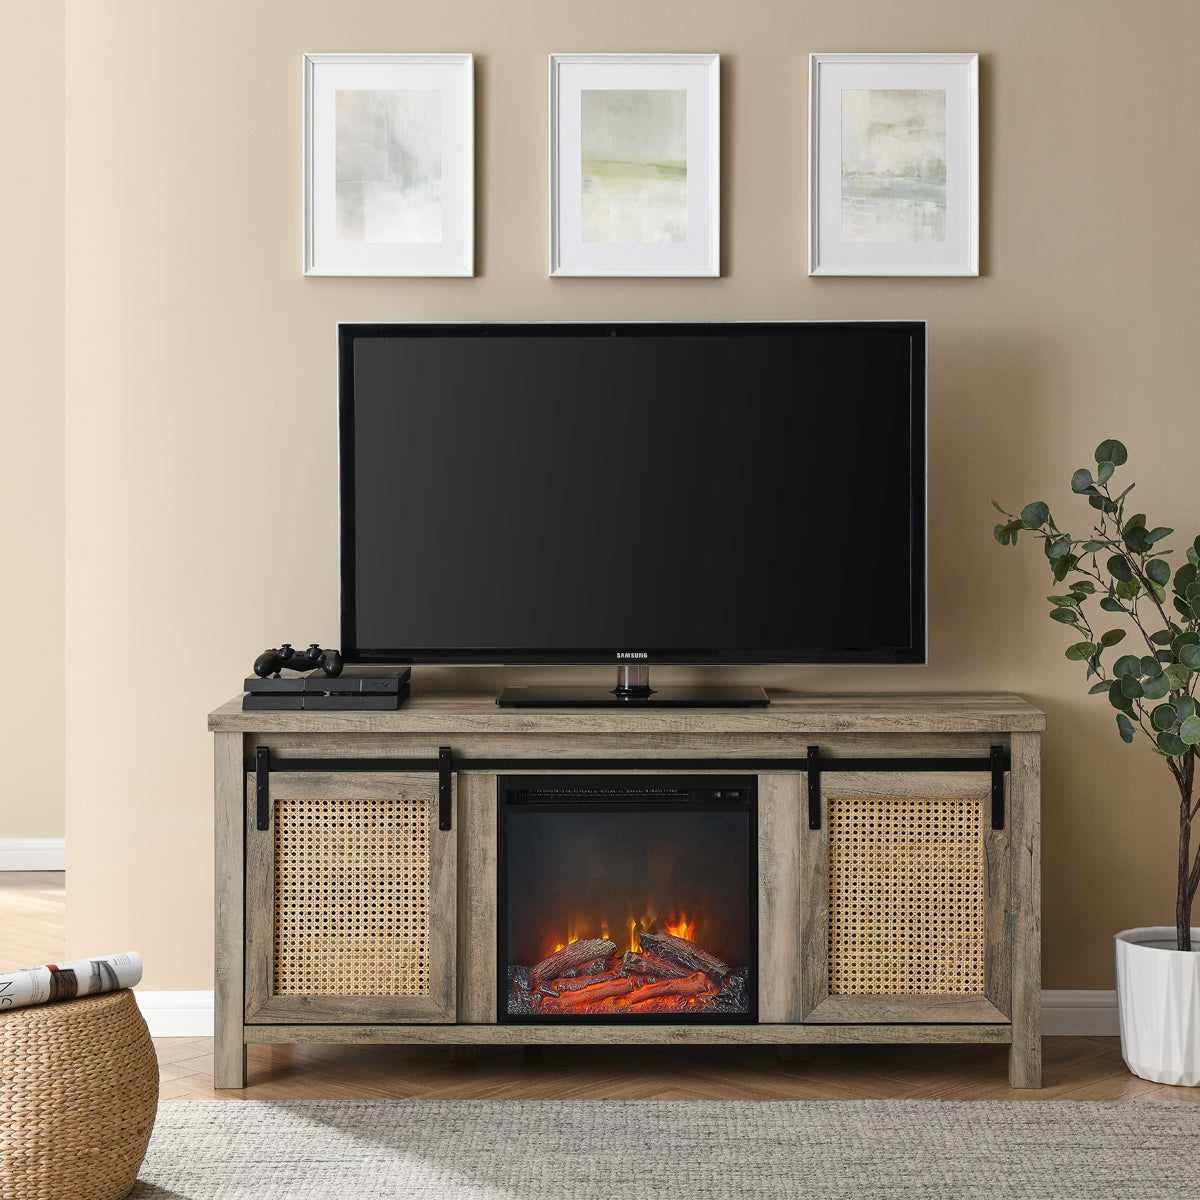 Modern TV Stand with Fireplace, Retro Farmhouse Fireplace TV Cabinet for TVs up to 65 inches with Storage, Entertainment Console TV Stand, for Living Room, Bedroom, Espresso, D3191